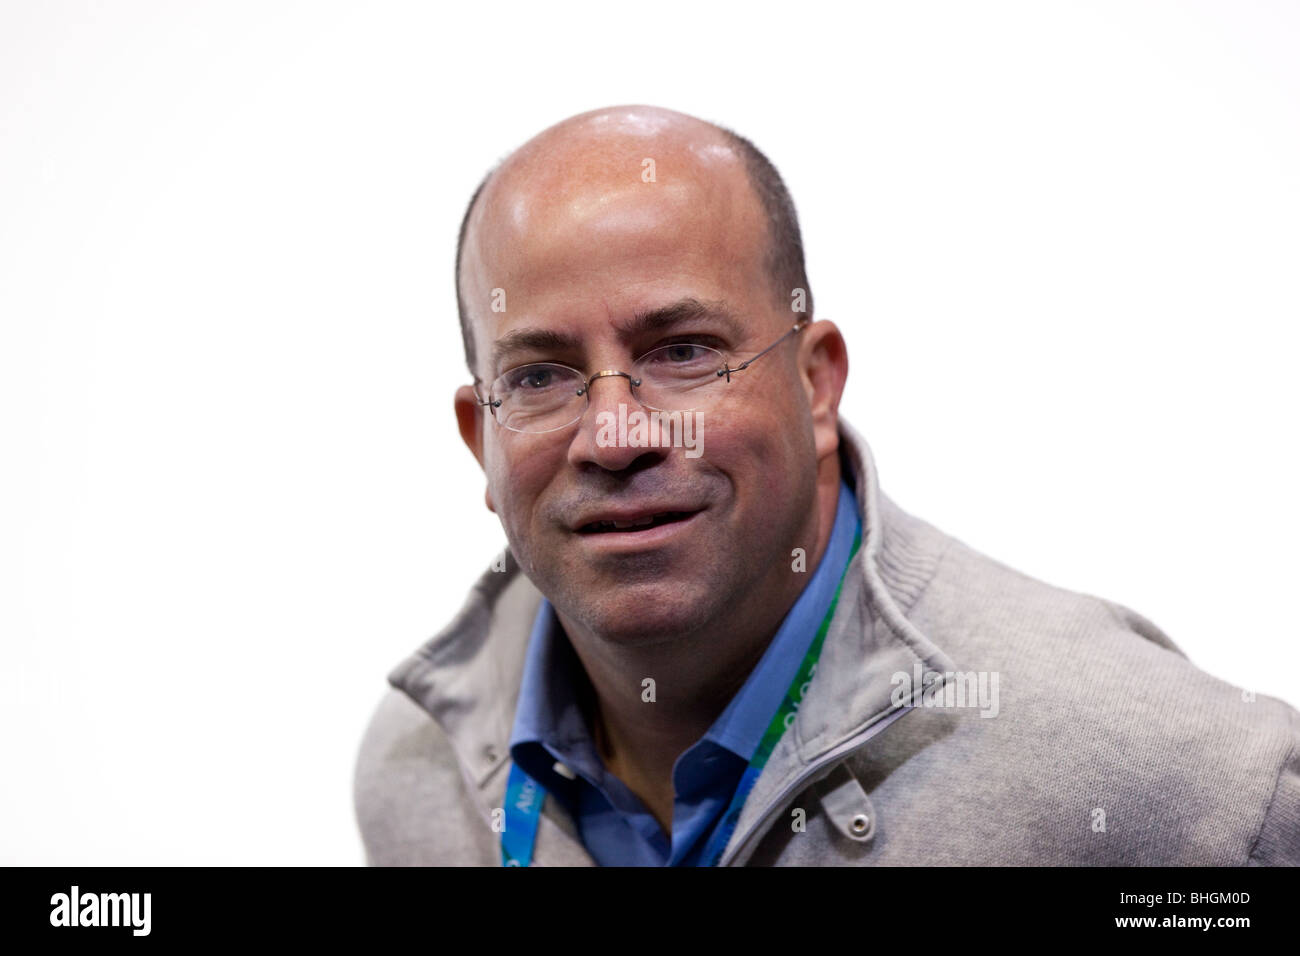 Jeff Zucker, President and CEO of NBC Universal at the pairs short competition at the 2010 Olympic Winter Games Stock Photo